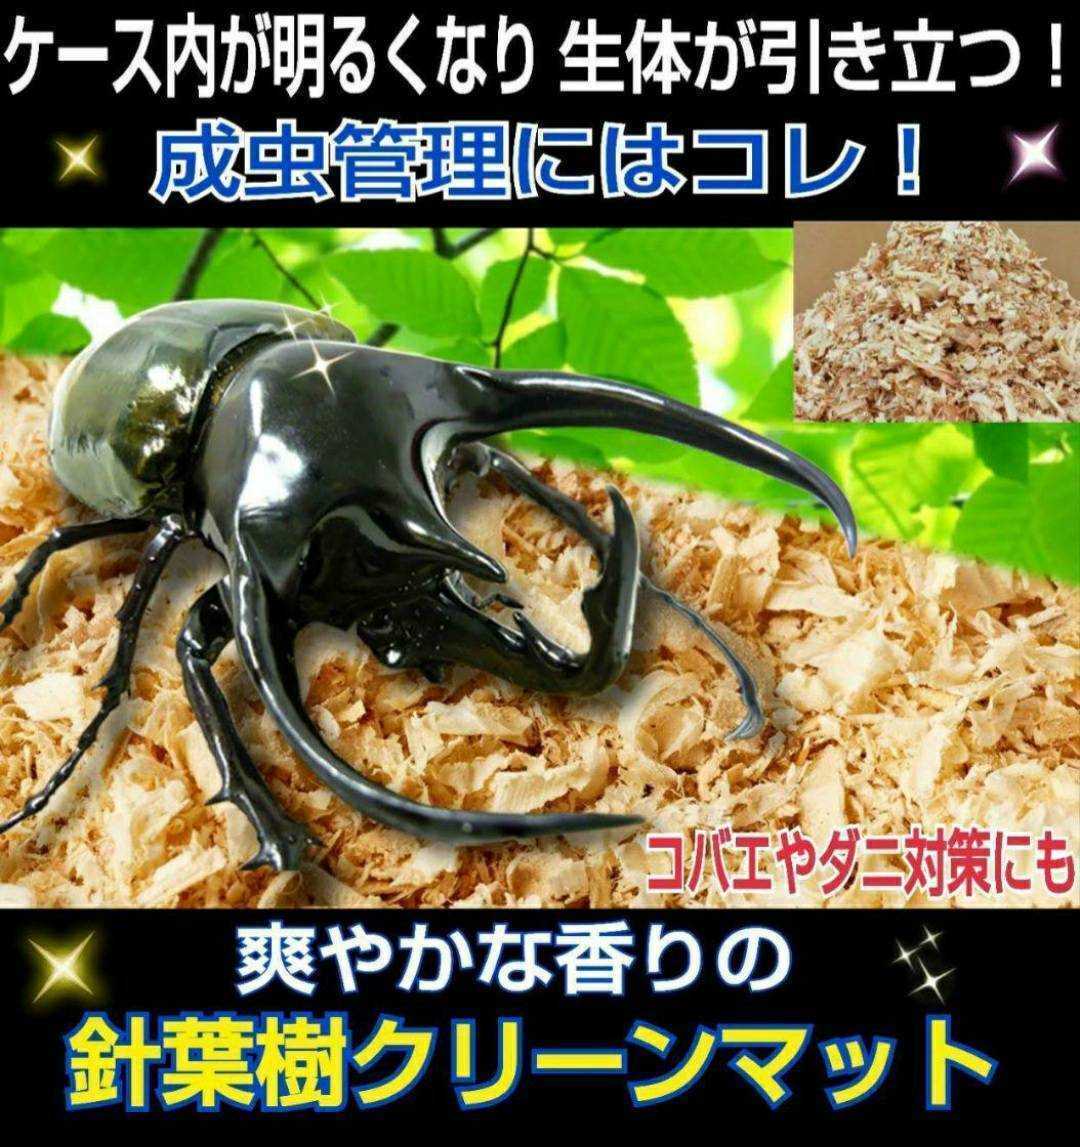  free shipping! stag beetle, Kabuto. imago control is this is most.! refreshing . fragrance. needle leaved tree clean mat * case inside . bright becomes organism . conspicuous *10L